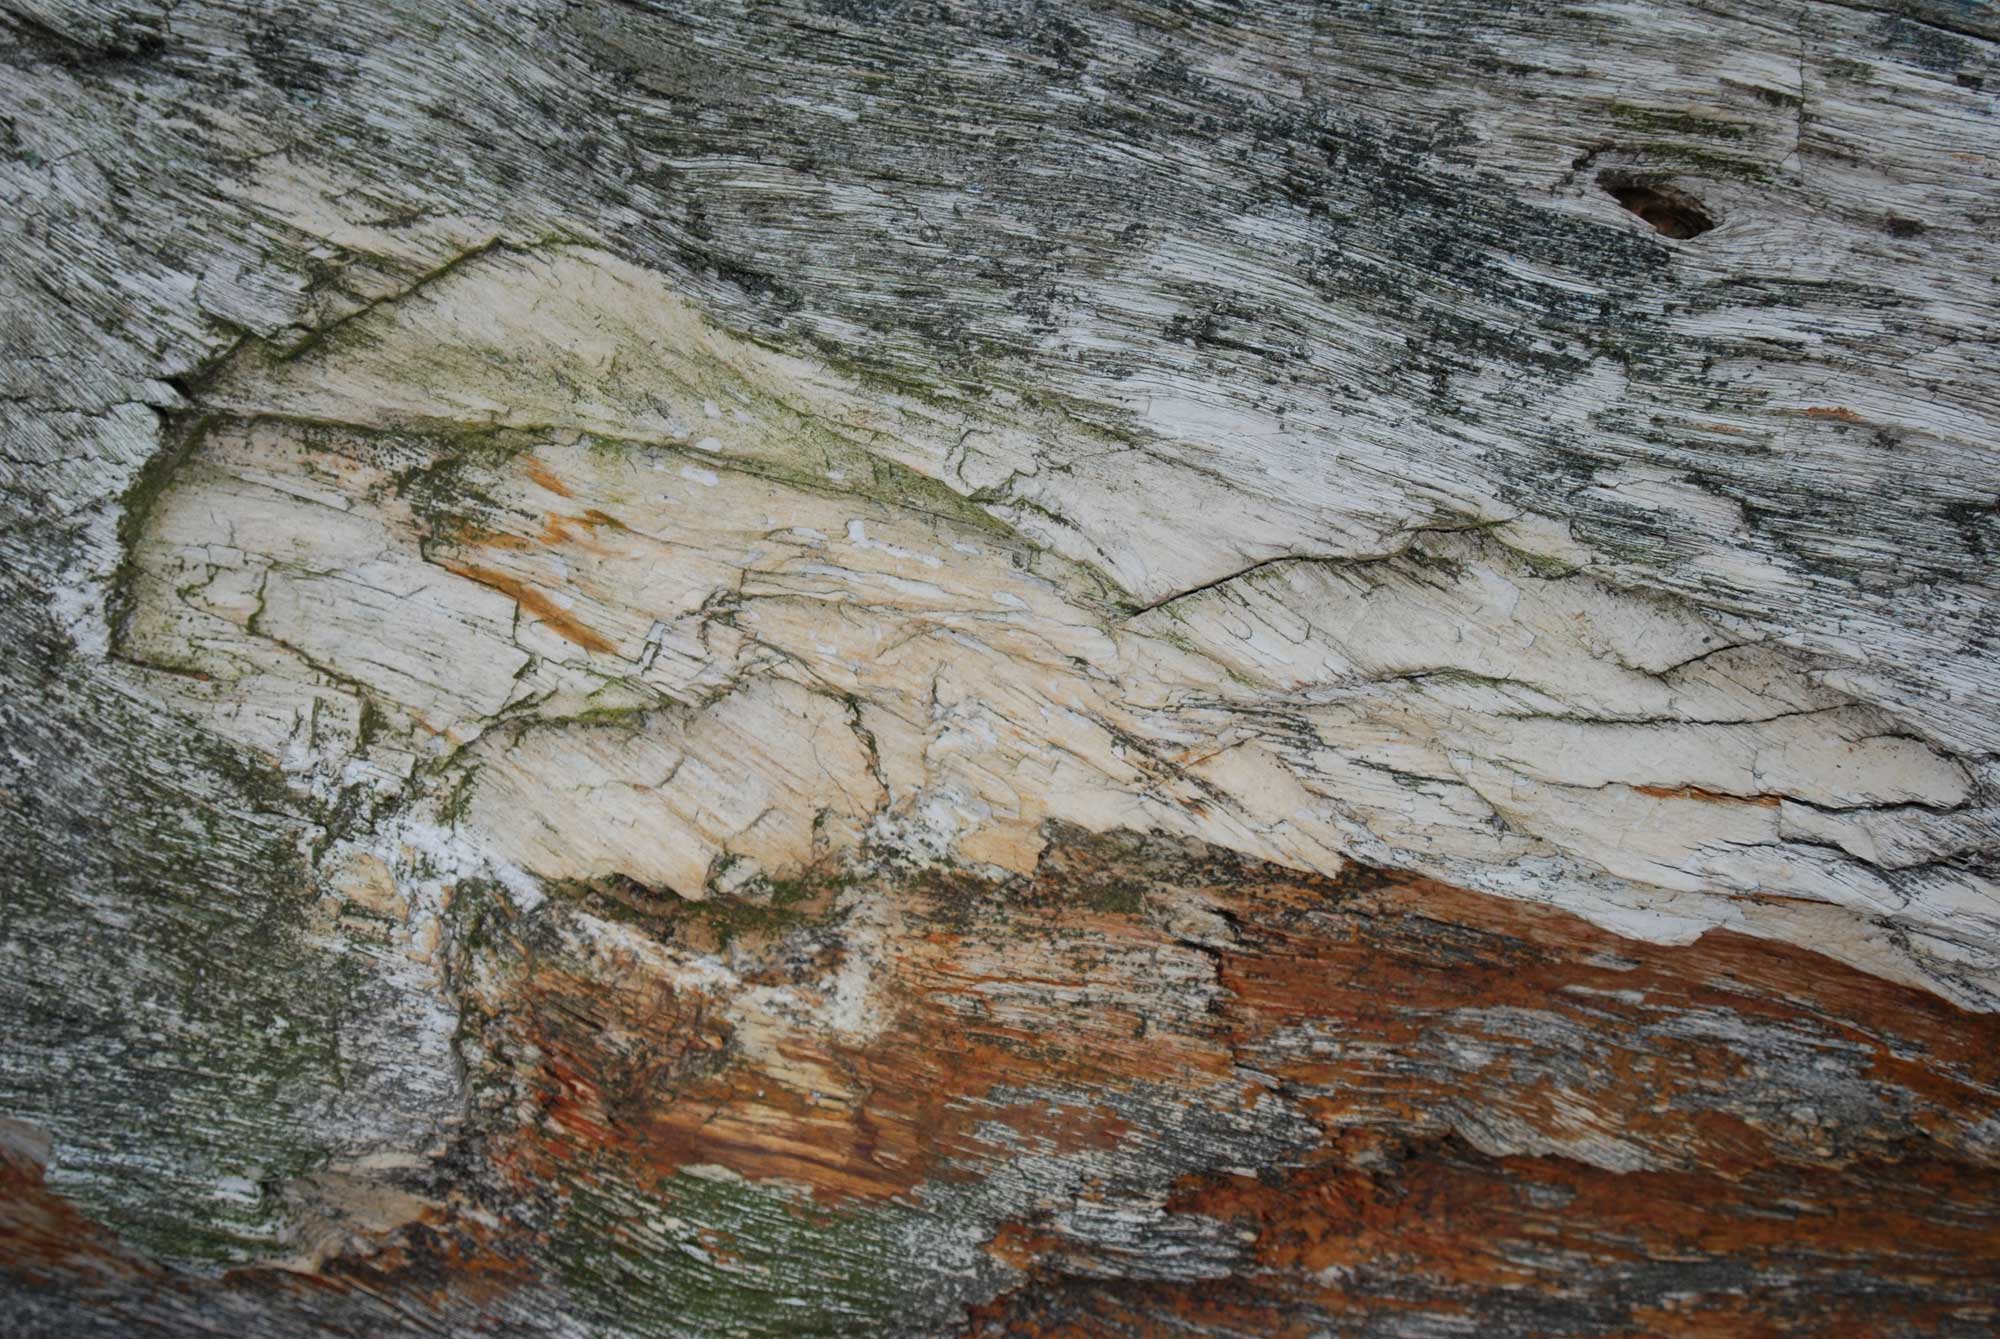 Photograph of petrified wood in close-up. Photo shows beige and rusty-colored wood. The wood grain can be seen.